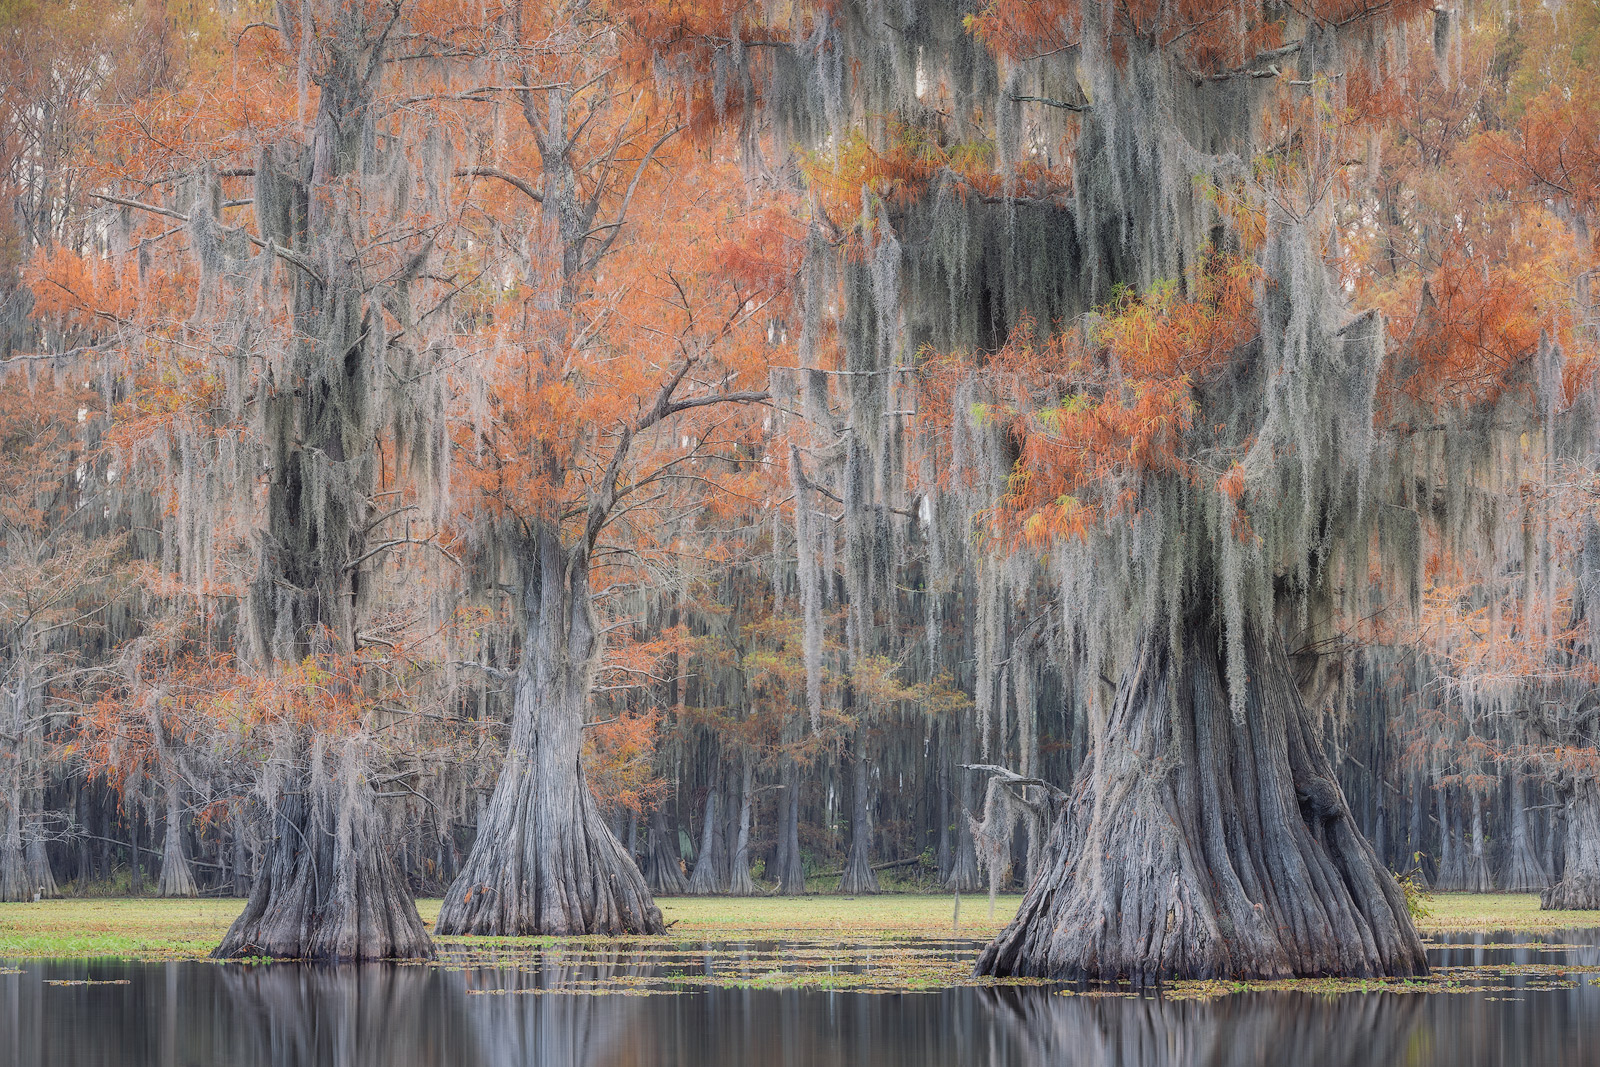 A blend of Fall color and hanging moss adds beauty to the bayou in Autumn.